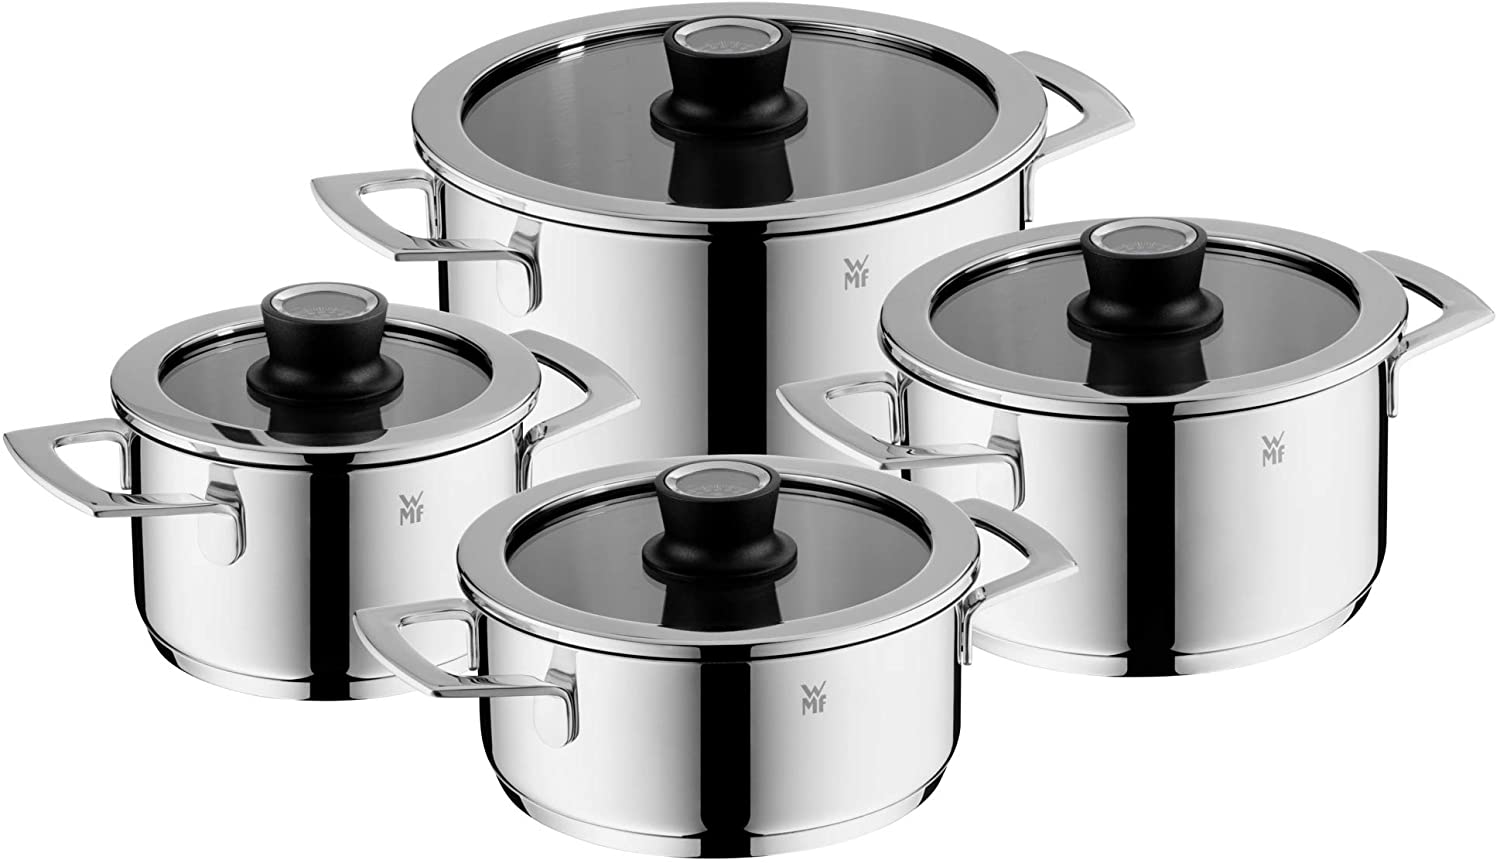 WMF VarioCuisine 4-Piece Saucepan Set Cromargan Polished Stainless Steel Pots with Silence Glass Lid, Thermometer, Induction Pots Uncoated